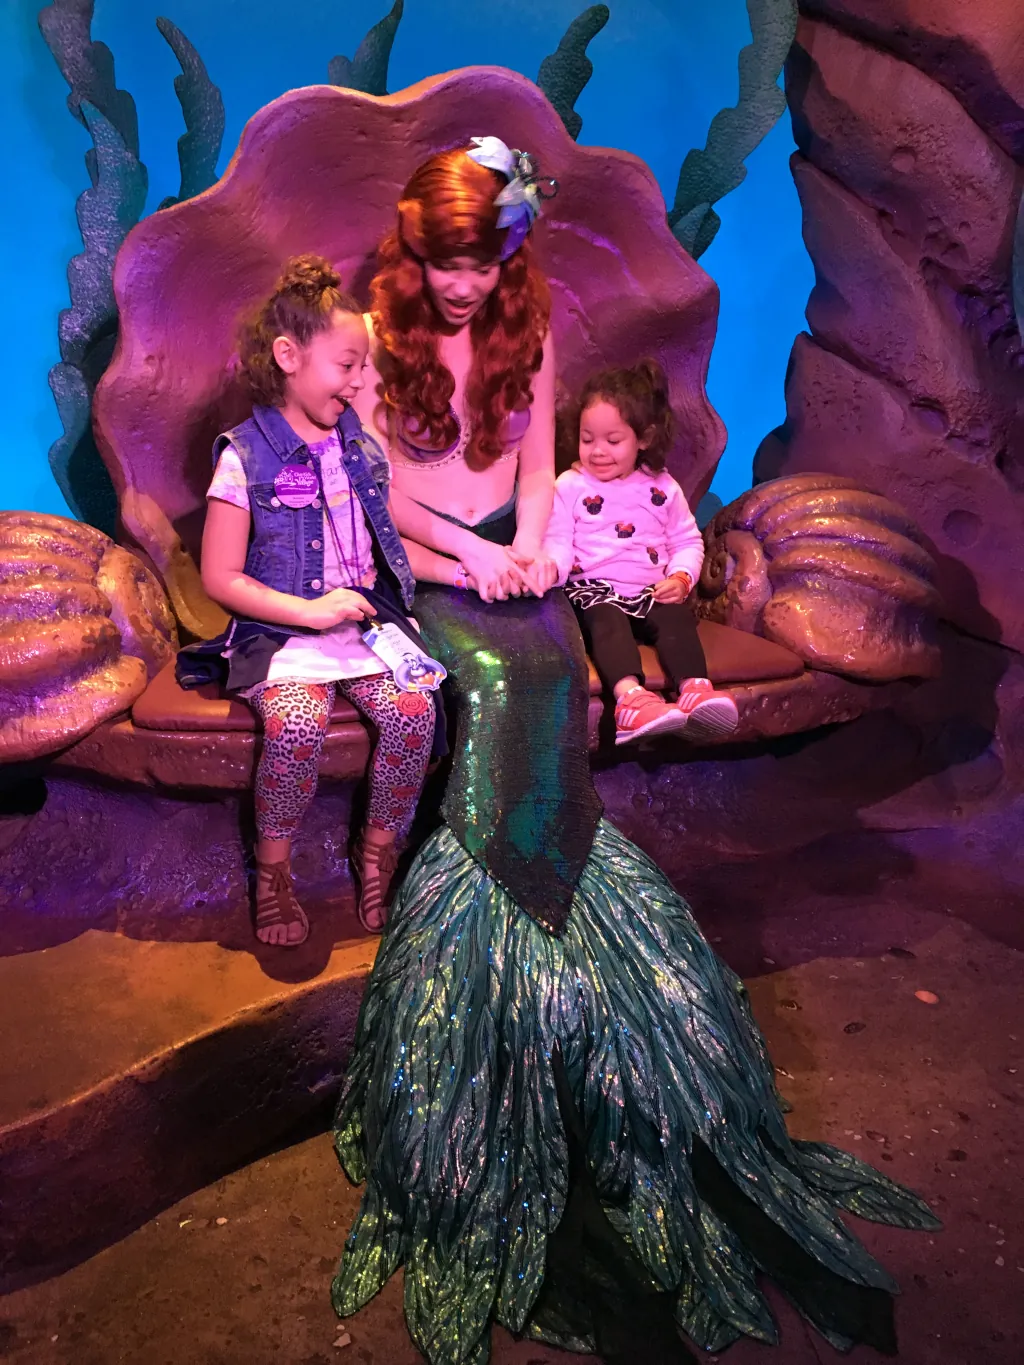 User Two young girls and a mermaid sitting in a themed setting that resembles an underwater scene, with the mermaid character engaging happily with the children.